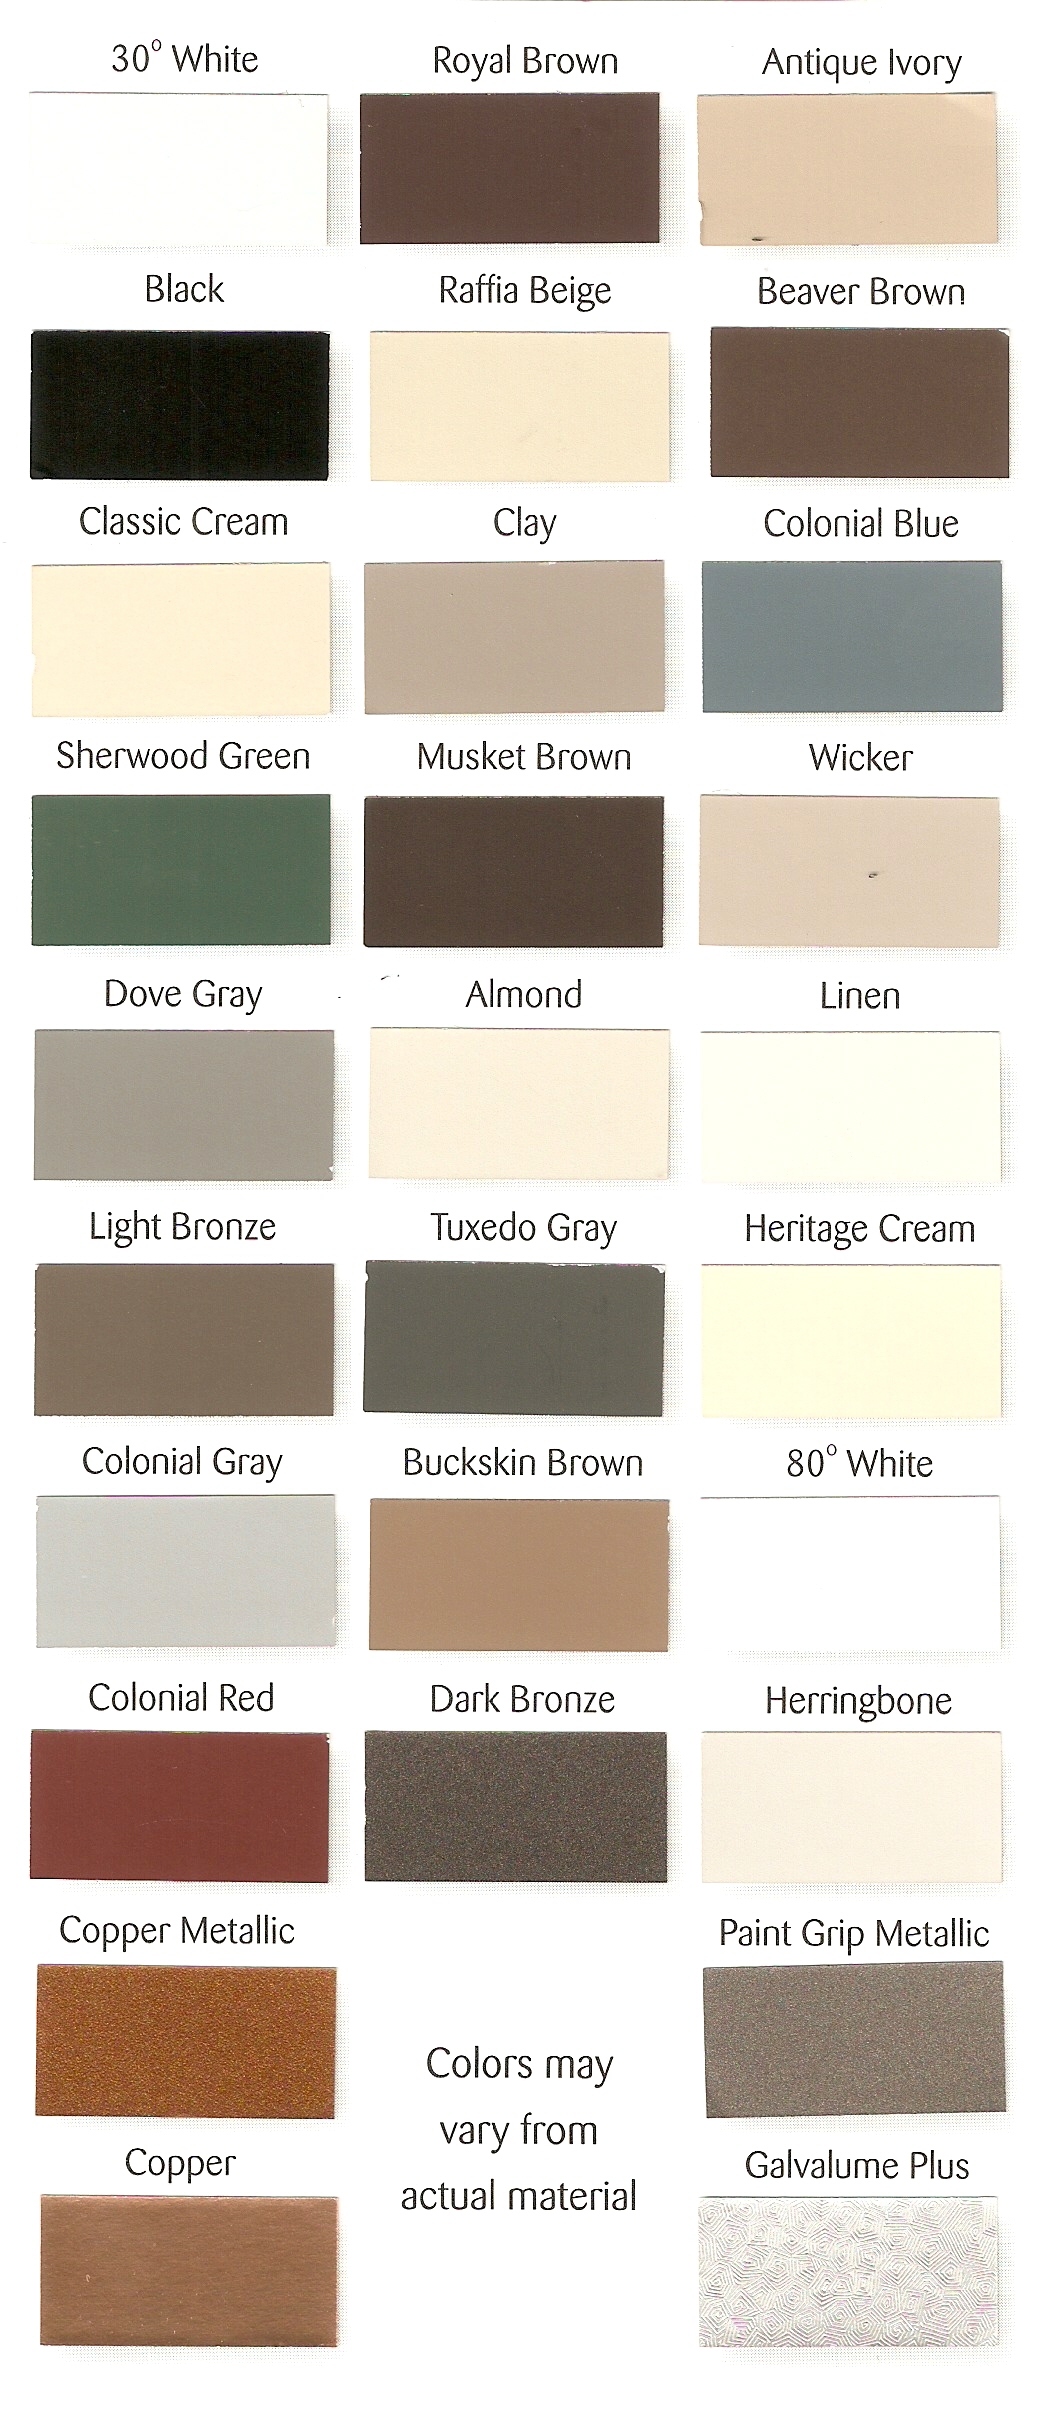 Weather Color Chart